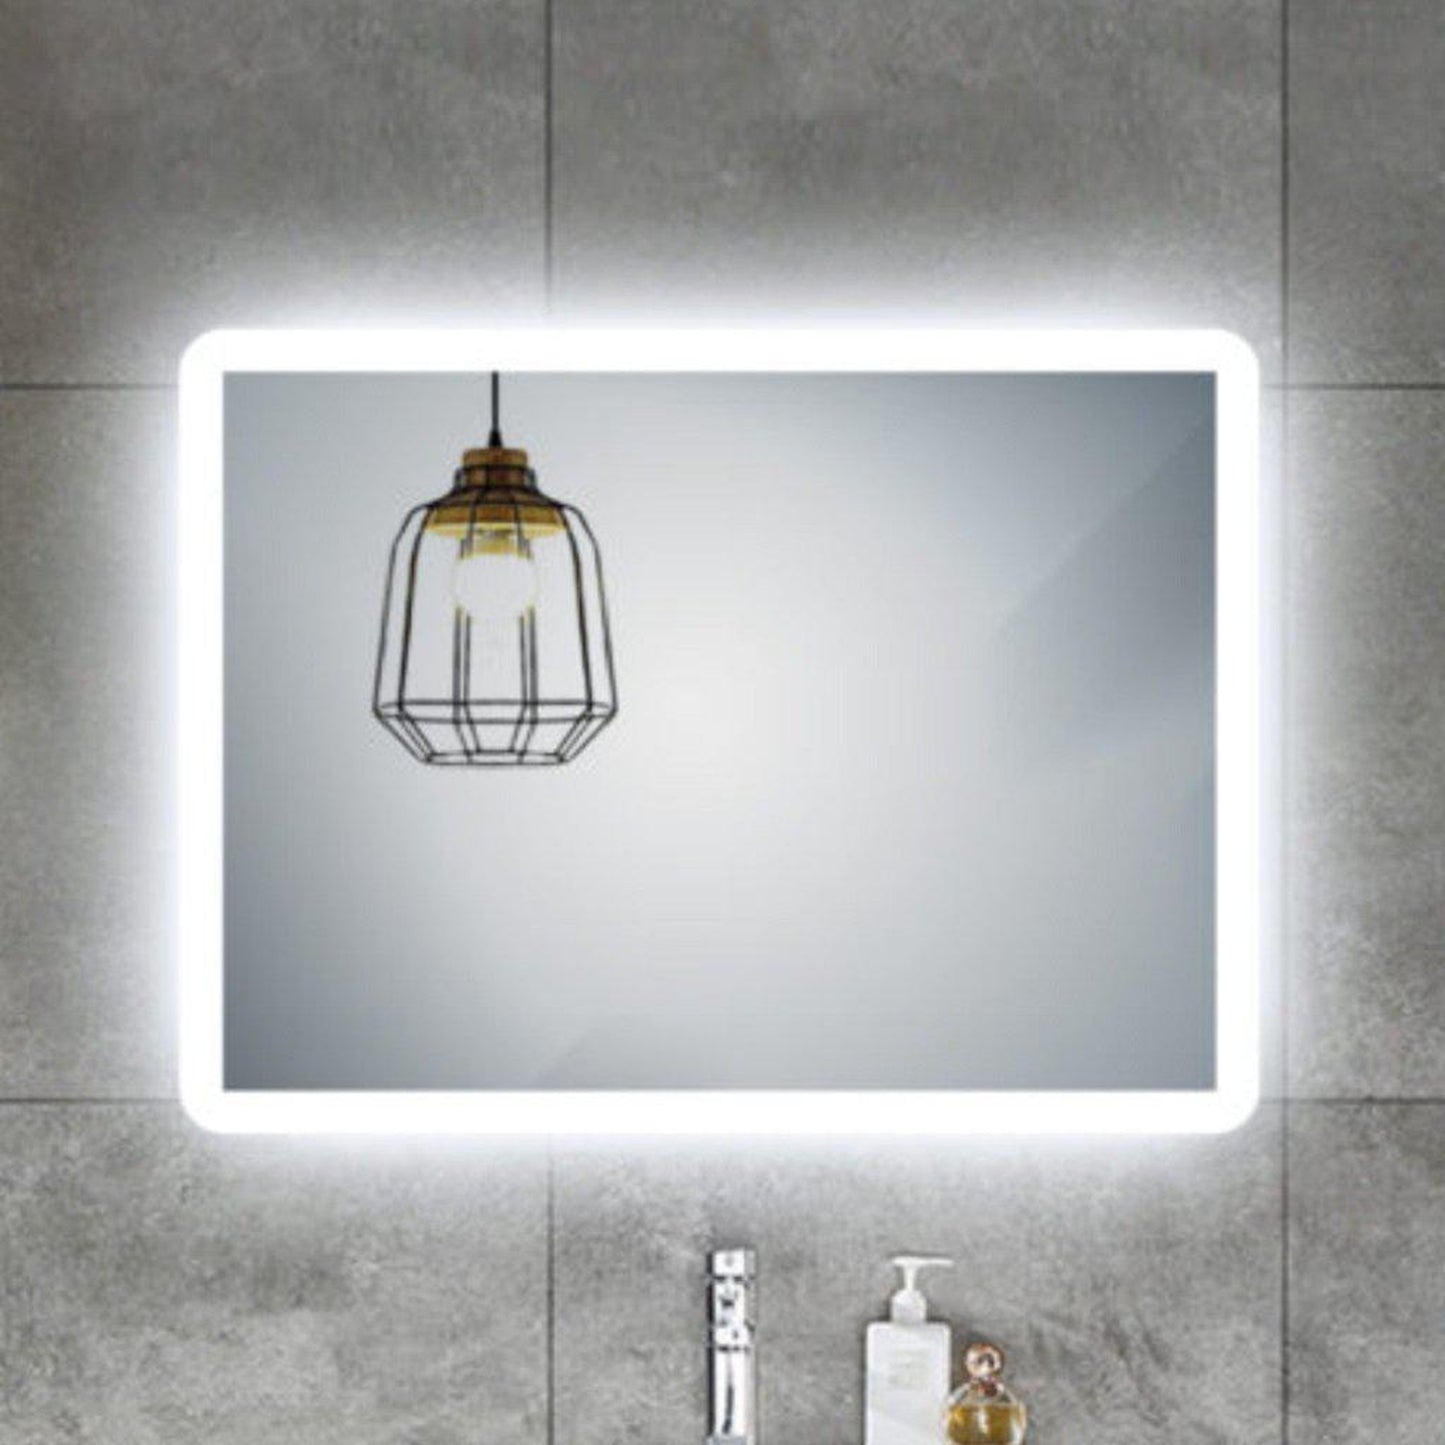 Lighted Impressions Blazer 32" x 24" Rectangular Frameless Wall-Mounted LED Mirror With 3-Section Rocker Switch